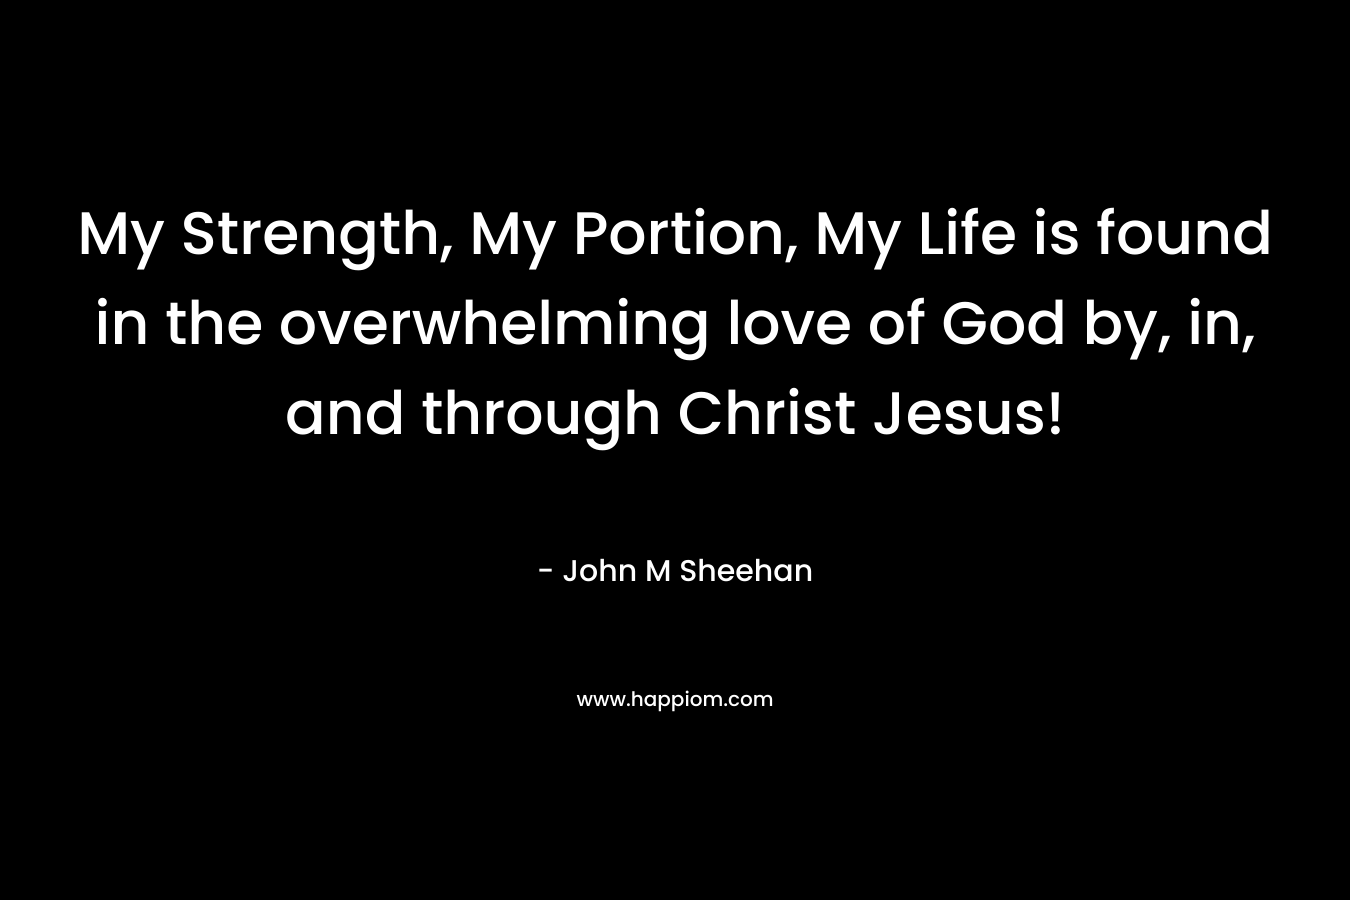 My Strength, My Portion, My Life is found in the overwhelming love of God by, in, and through Christ Jesus! – John M Sheehan